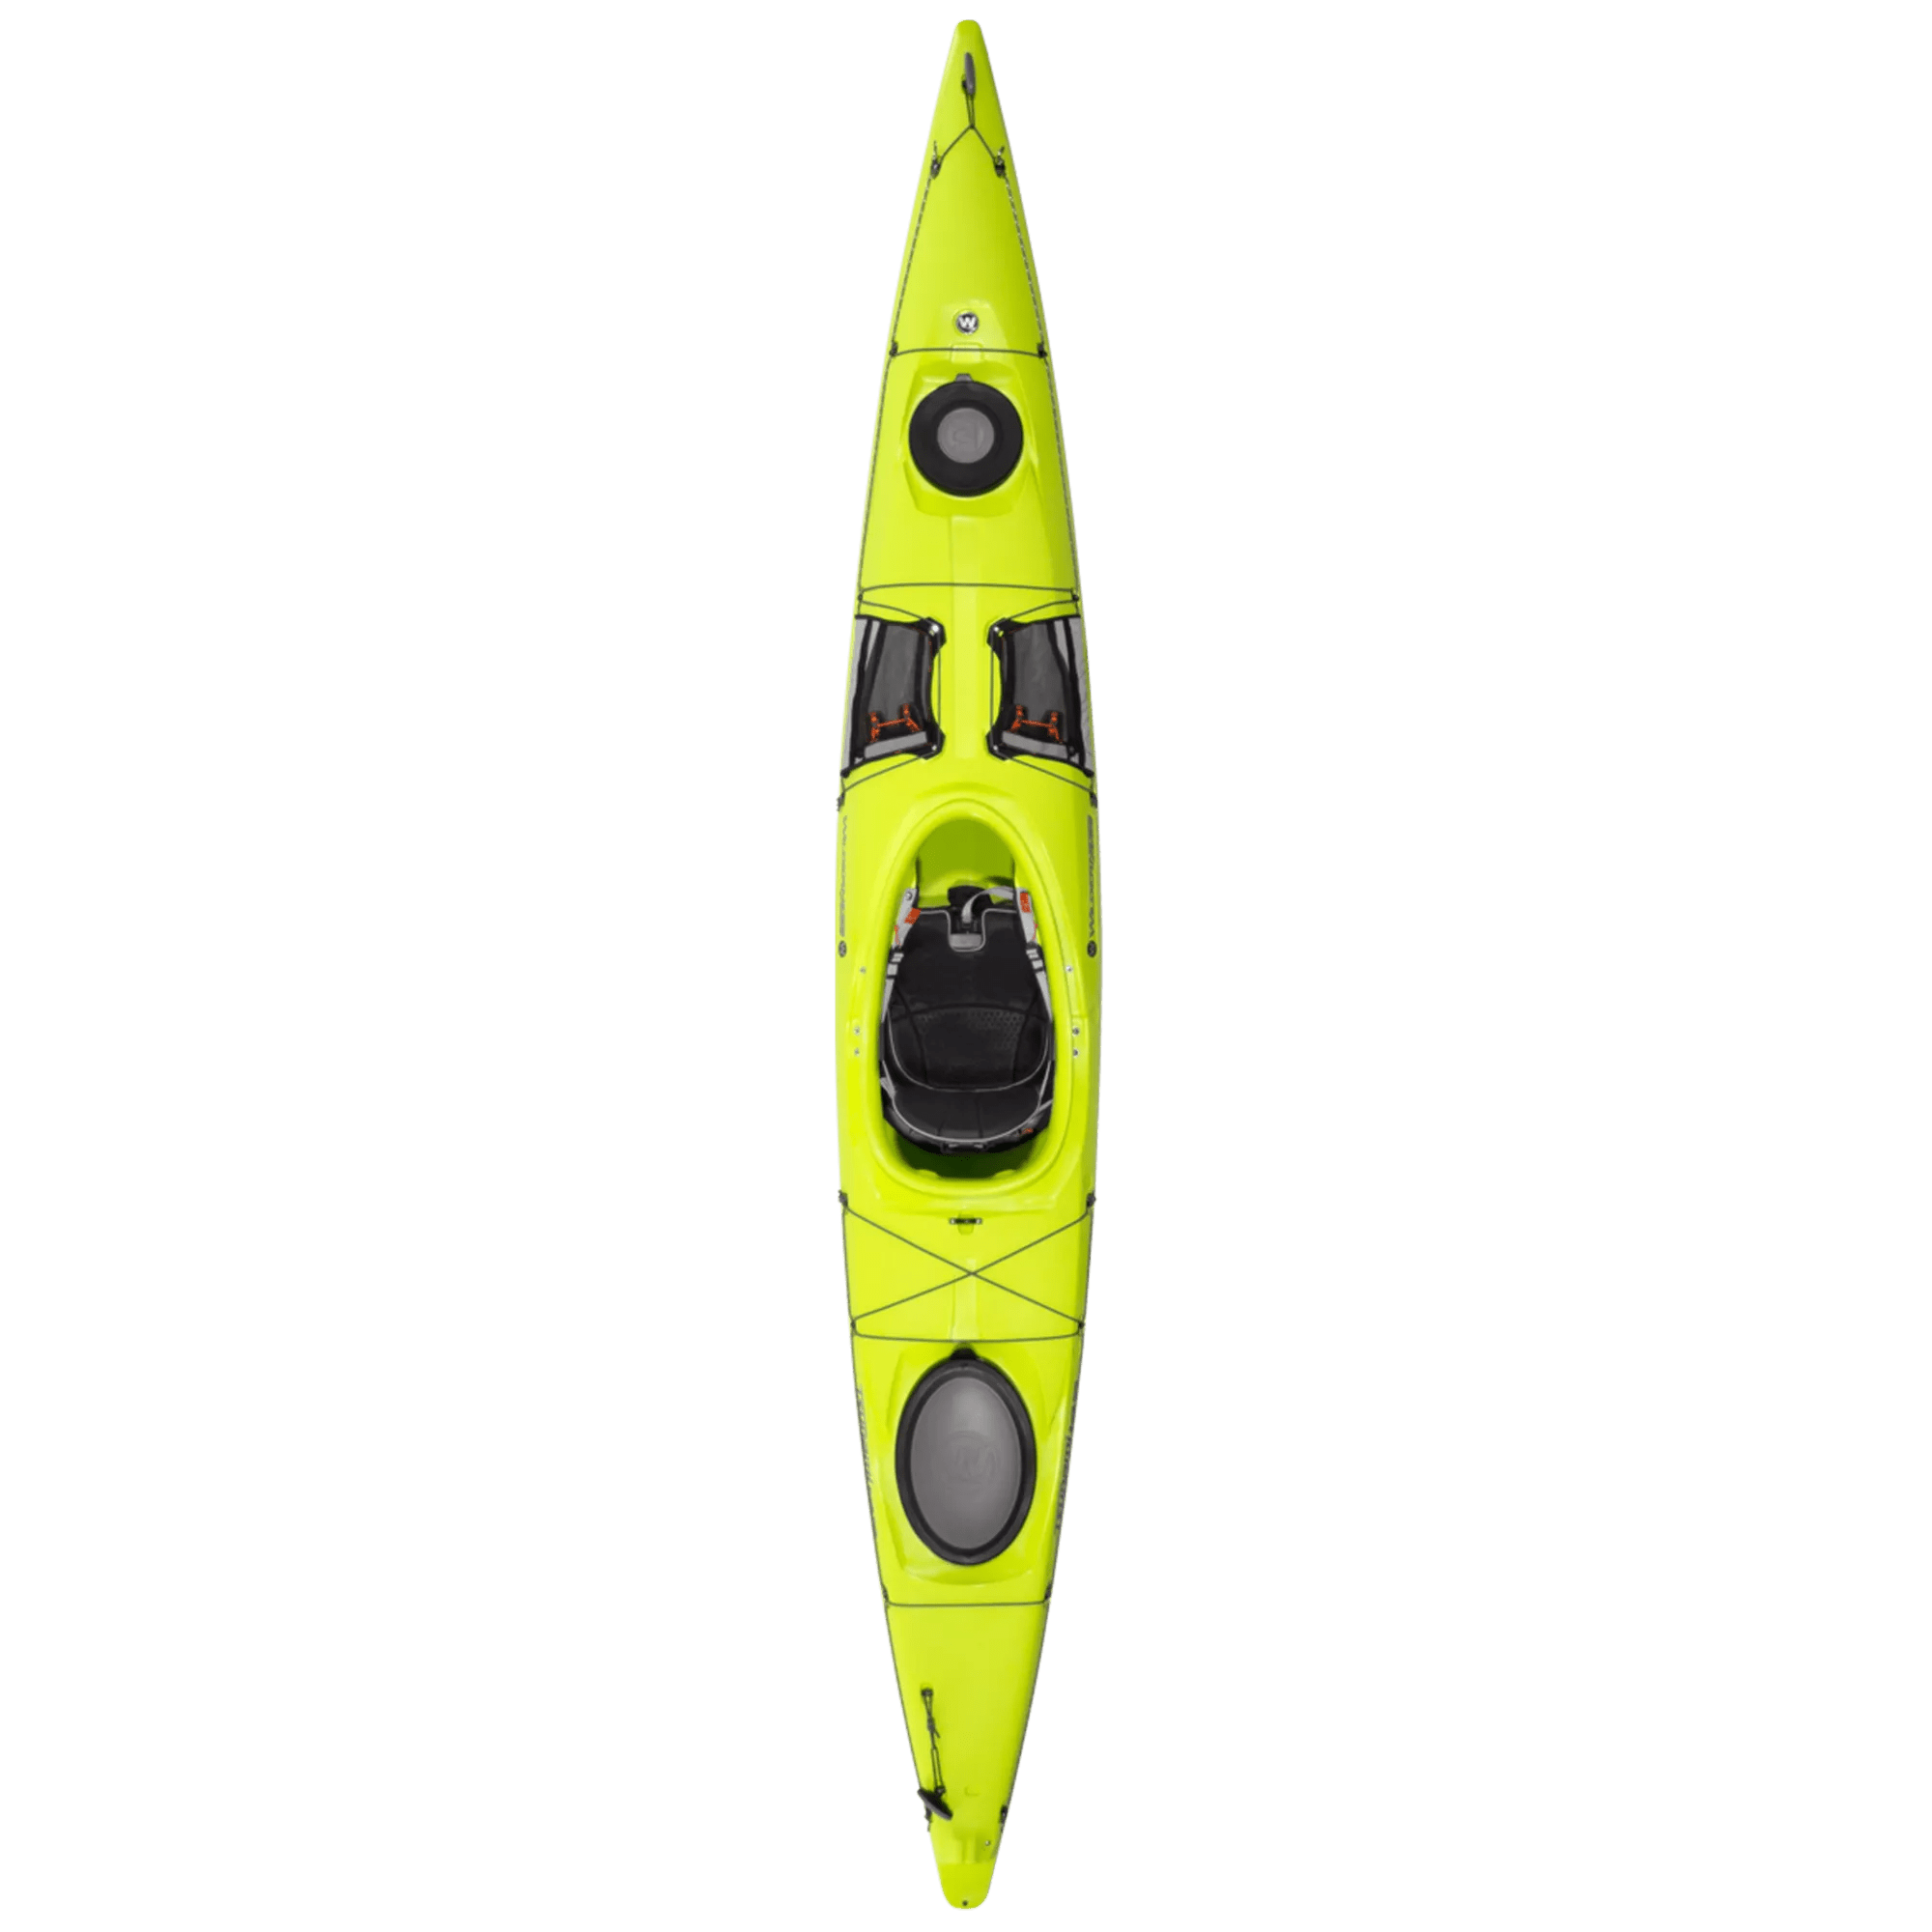 WILDERNESS SYSTEMS - Tsunami 145 Day Touring Kayak - Discontinued color/model - Yellow - 9720458180 - TOP 